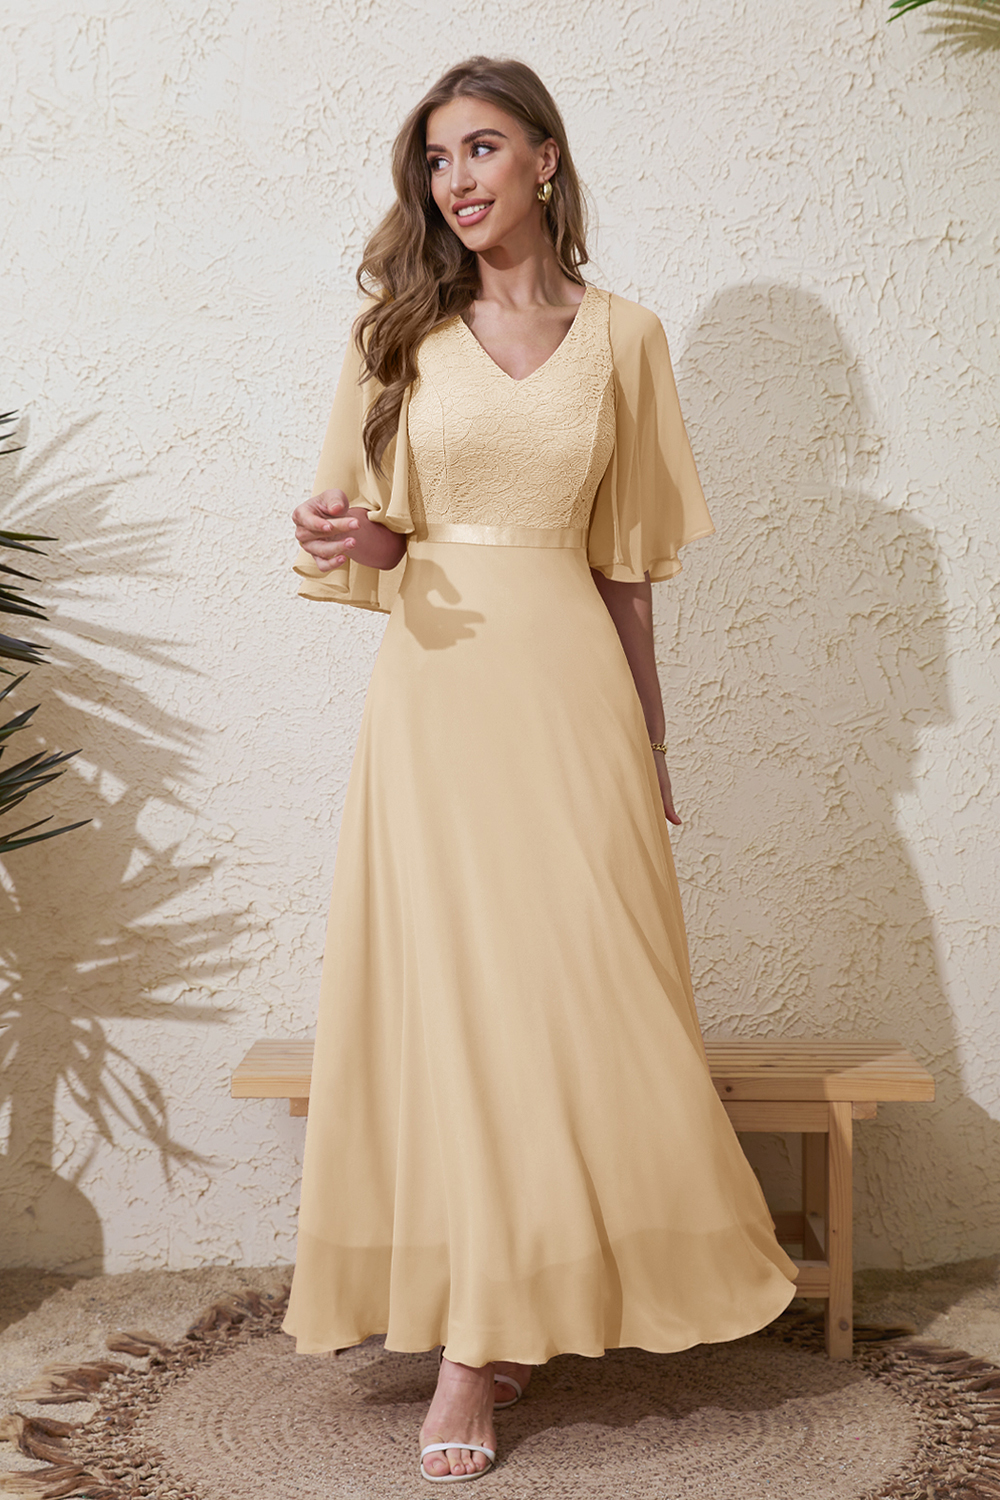 Elegant Champagne V-Neck Chiffon Evening Gown for Formal Occasions